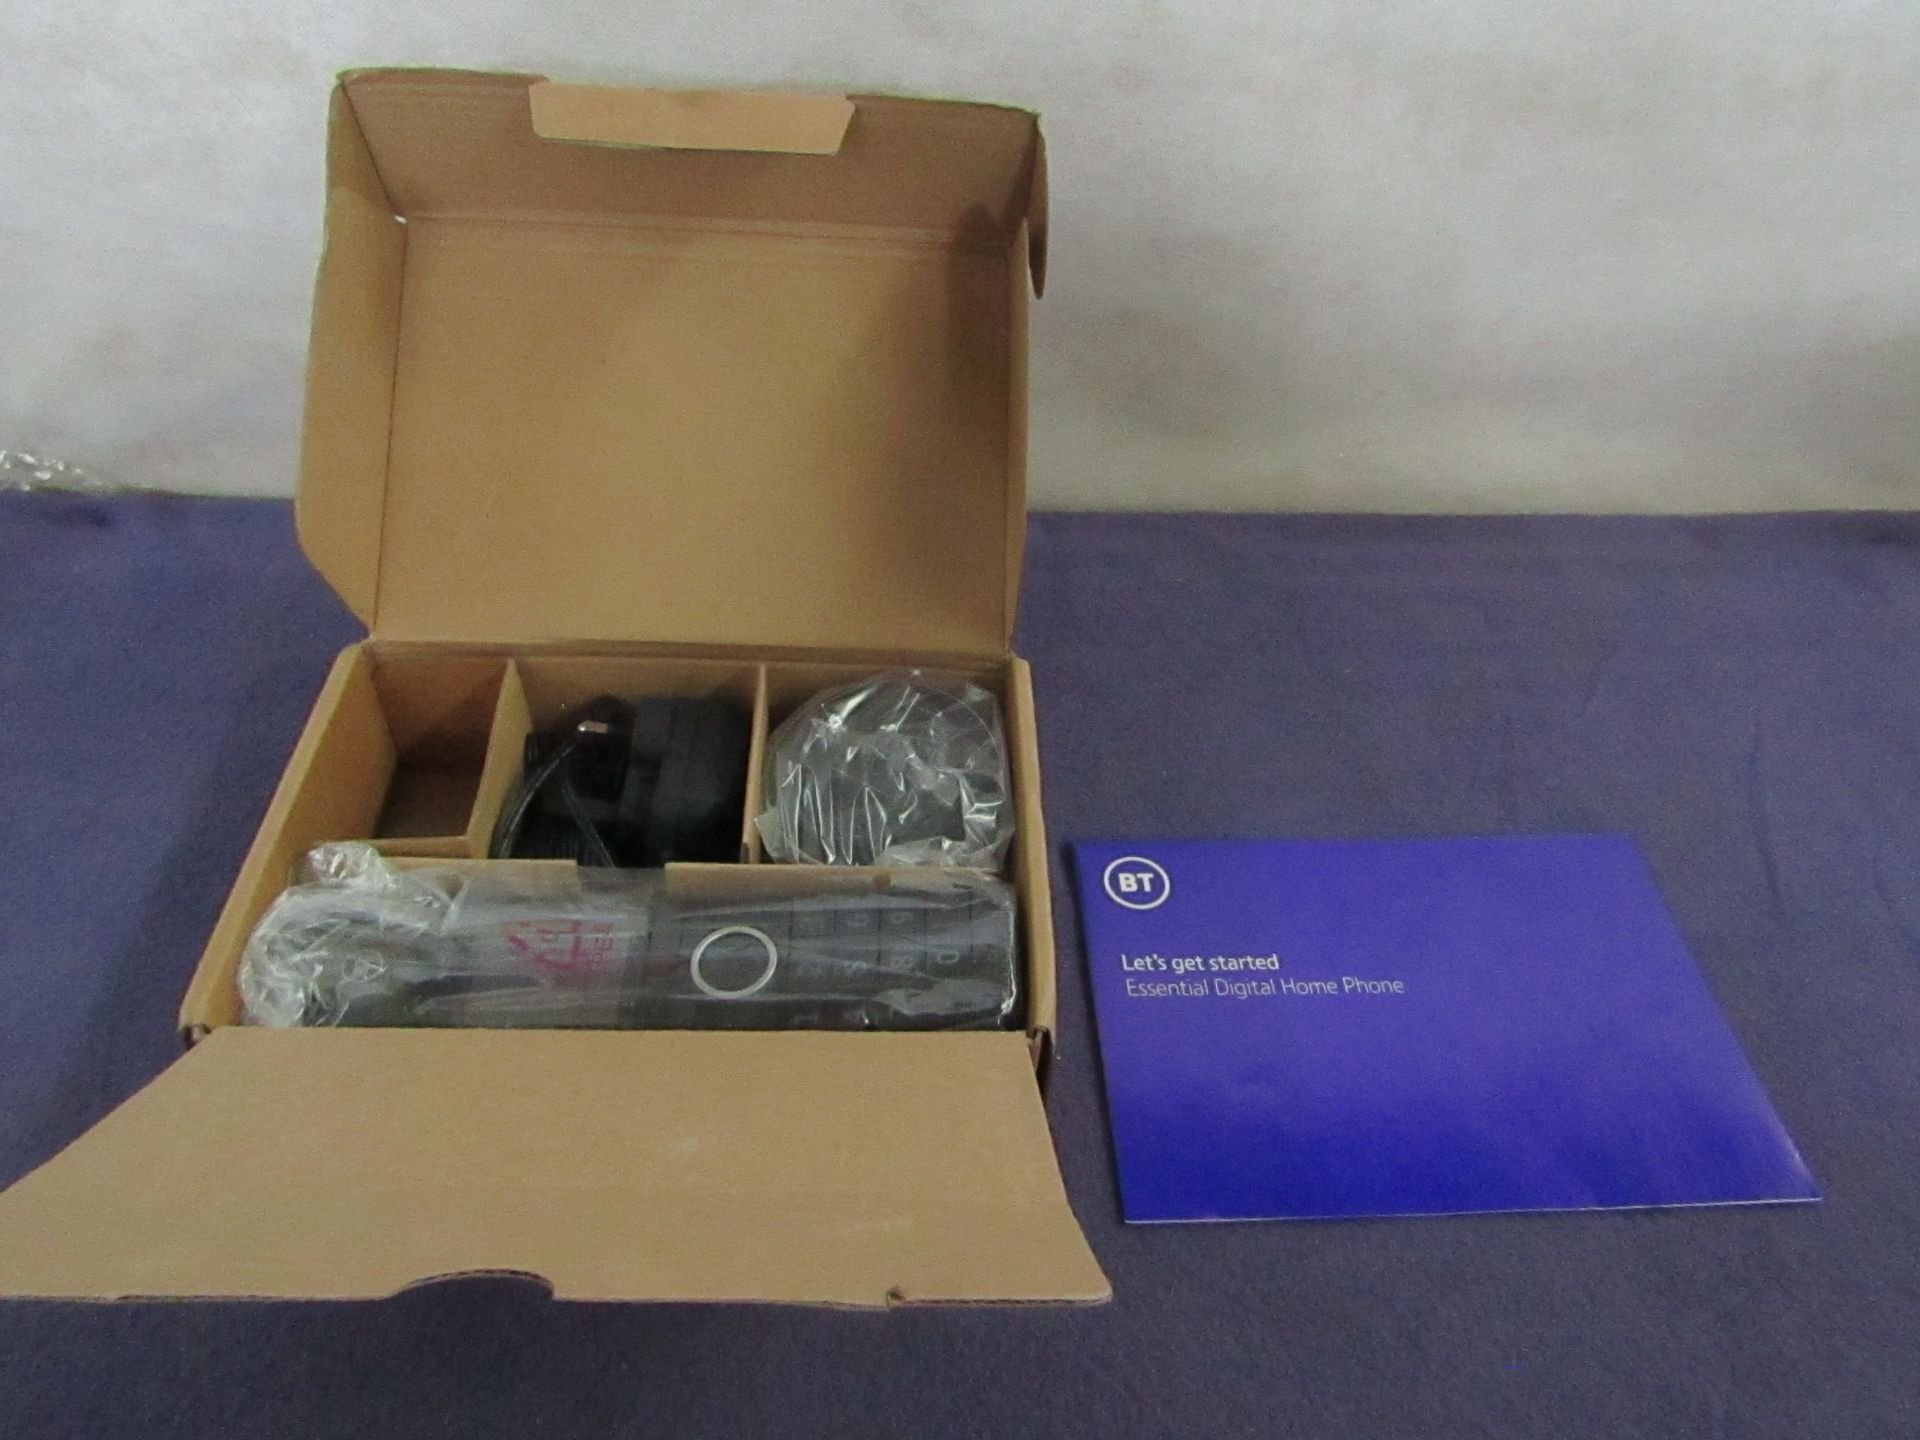 BT - Advanced Digital Home Phone With HD Calling - Good Condition & Boxed.